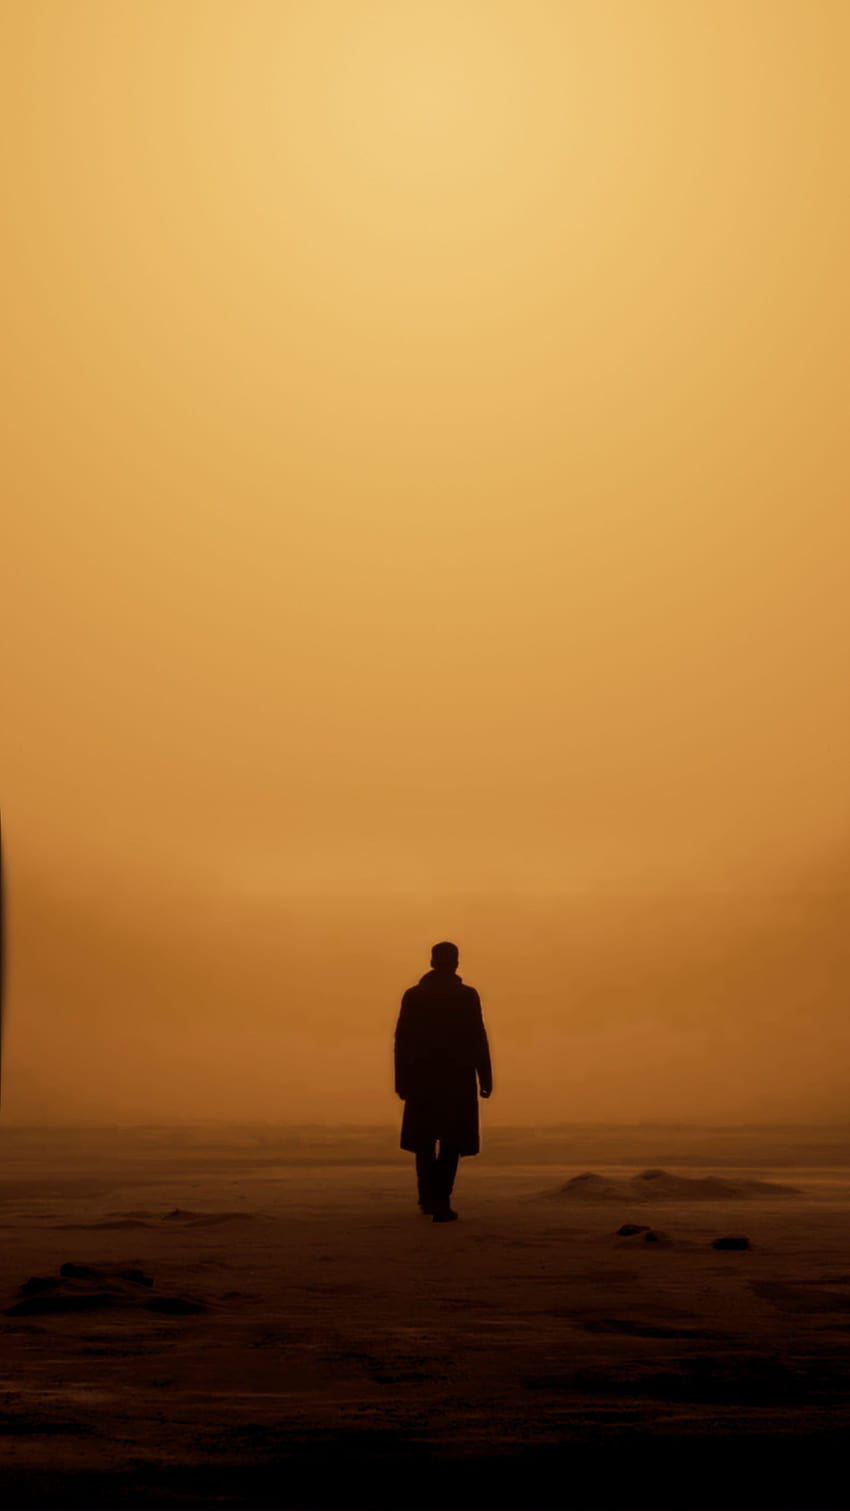 Blade Runner 2049 for Your iPhone and iPad, blade runner 2049 phone HD phone wallpaper